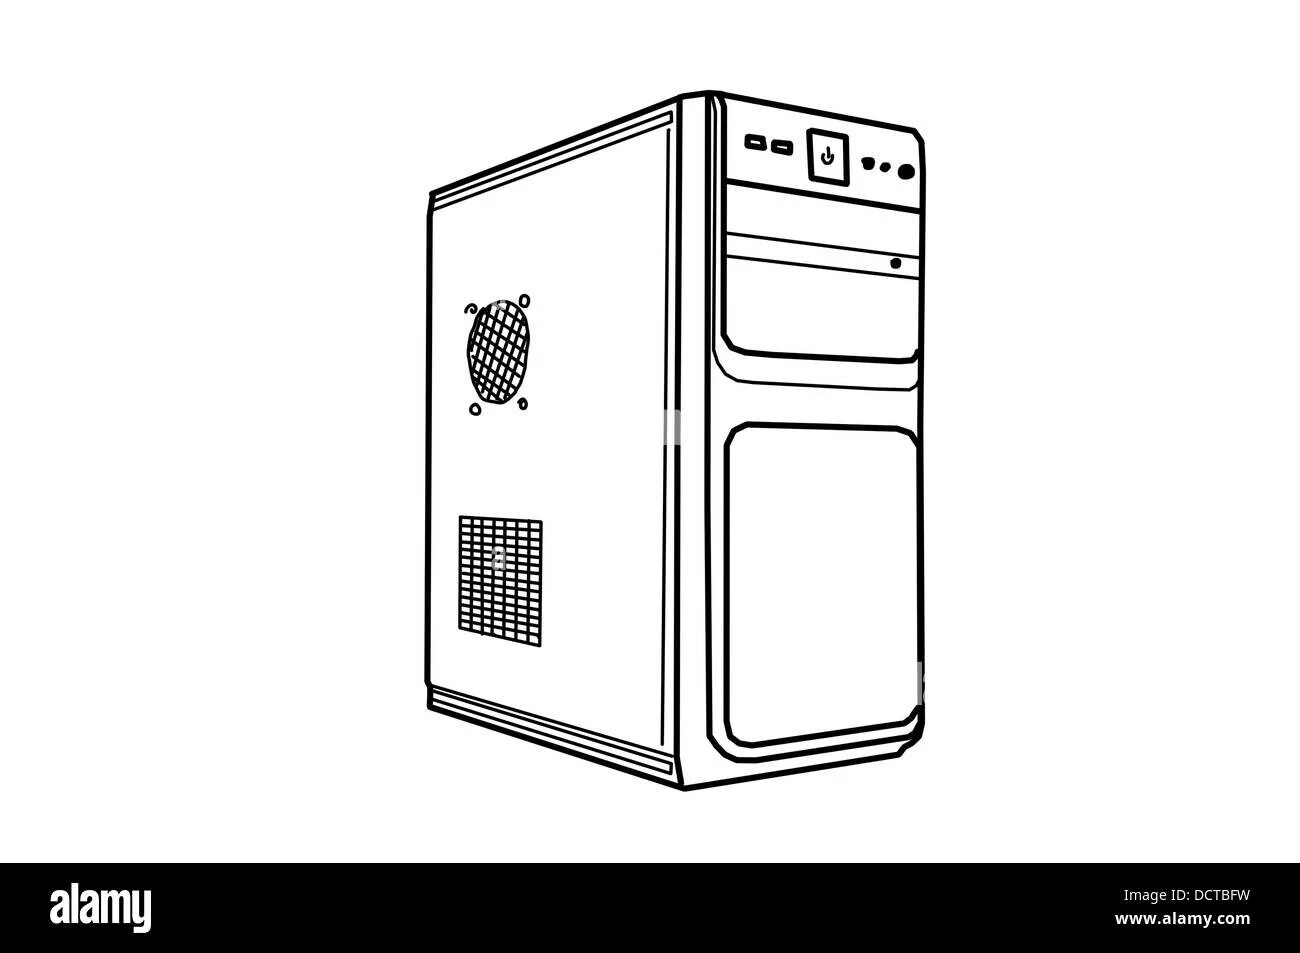 Pc case coloring page